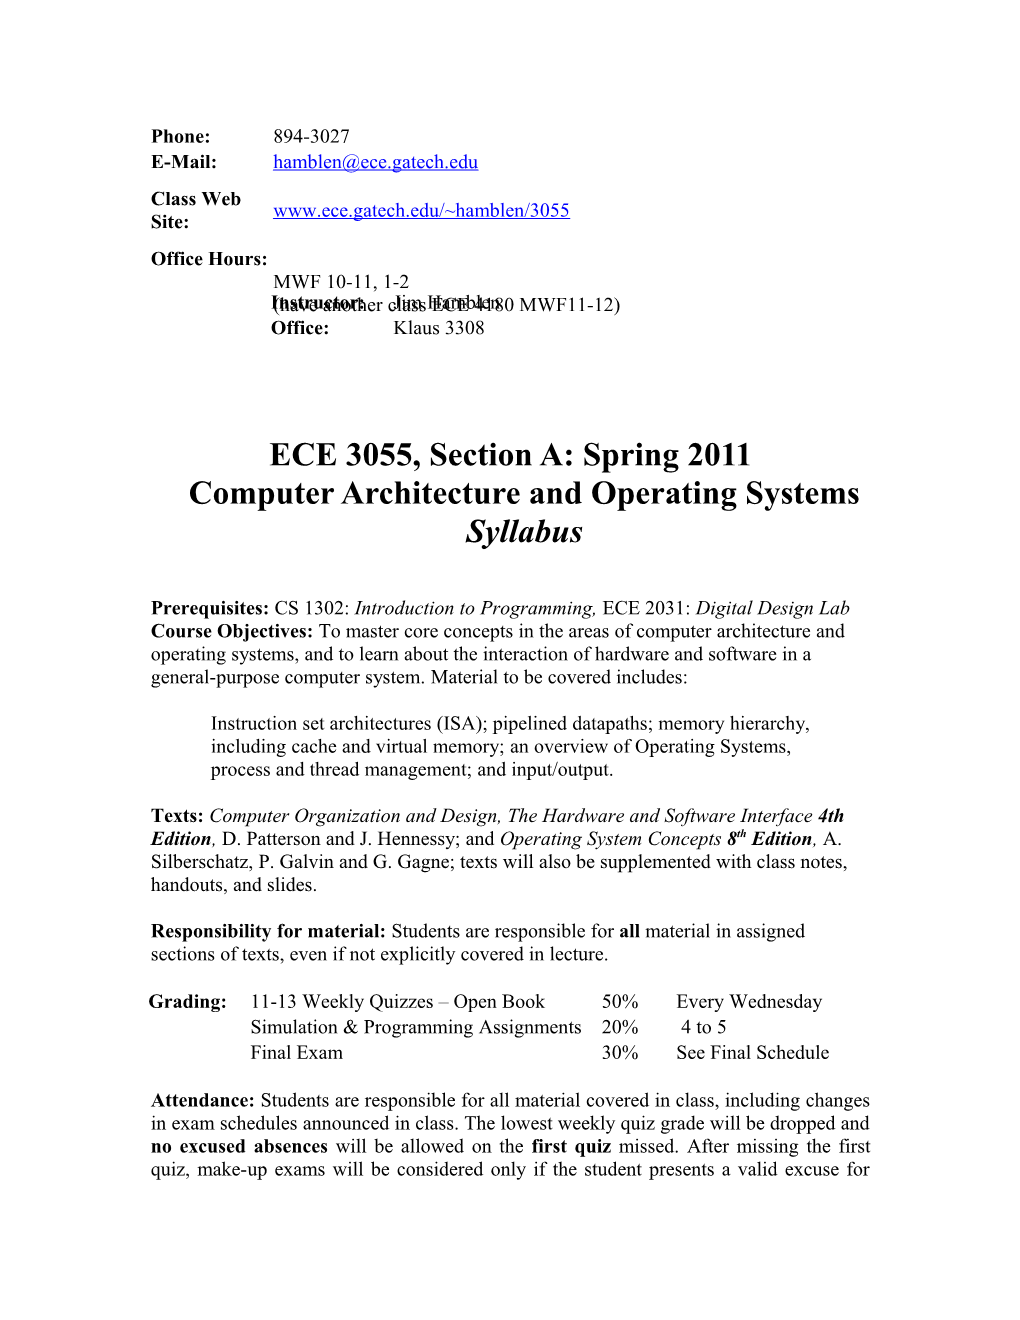 ECE 3055, Section A: Spring 2011Computer Architecture and Operating Systems Syllabus